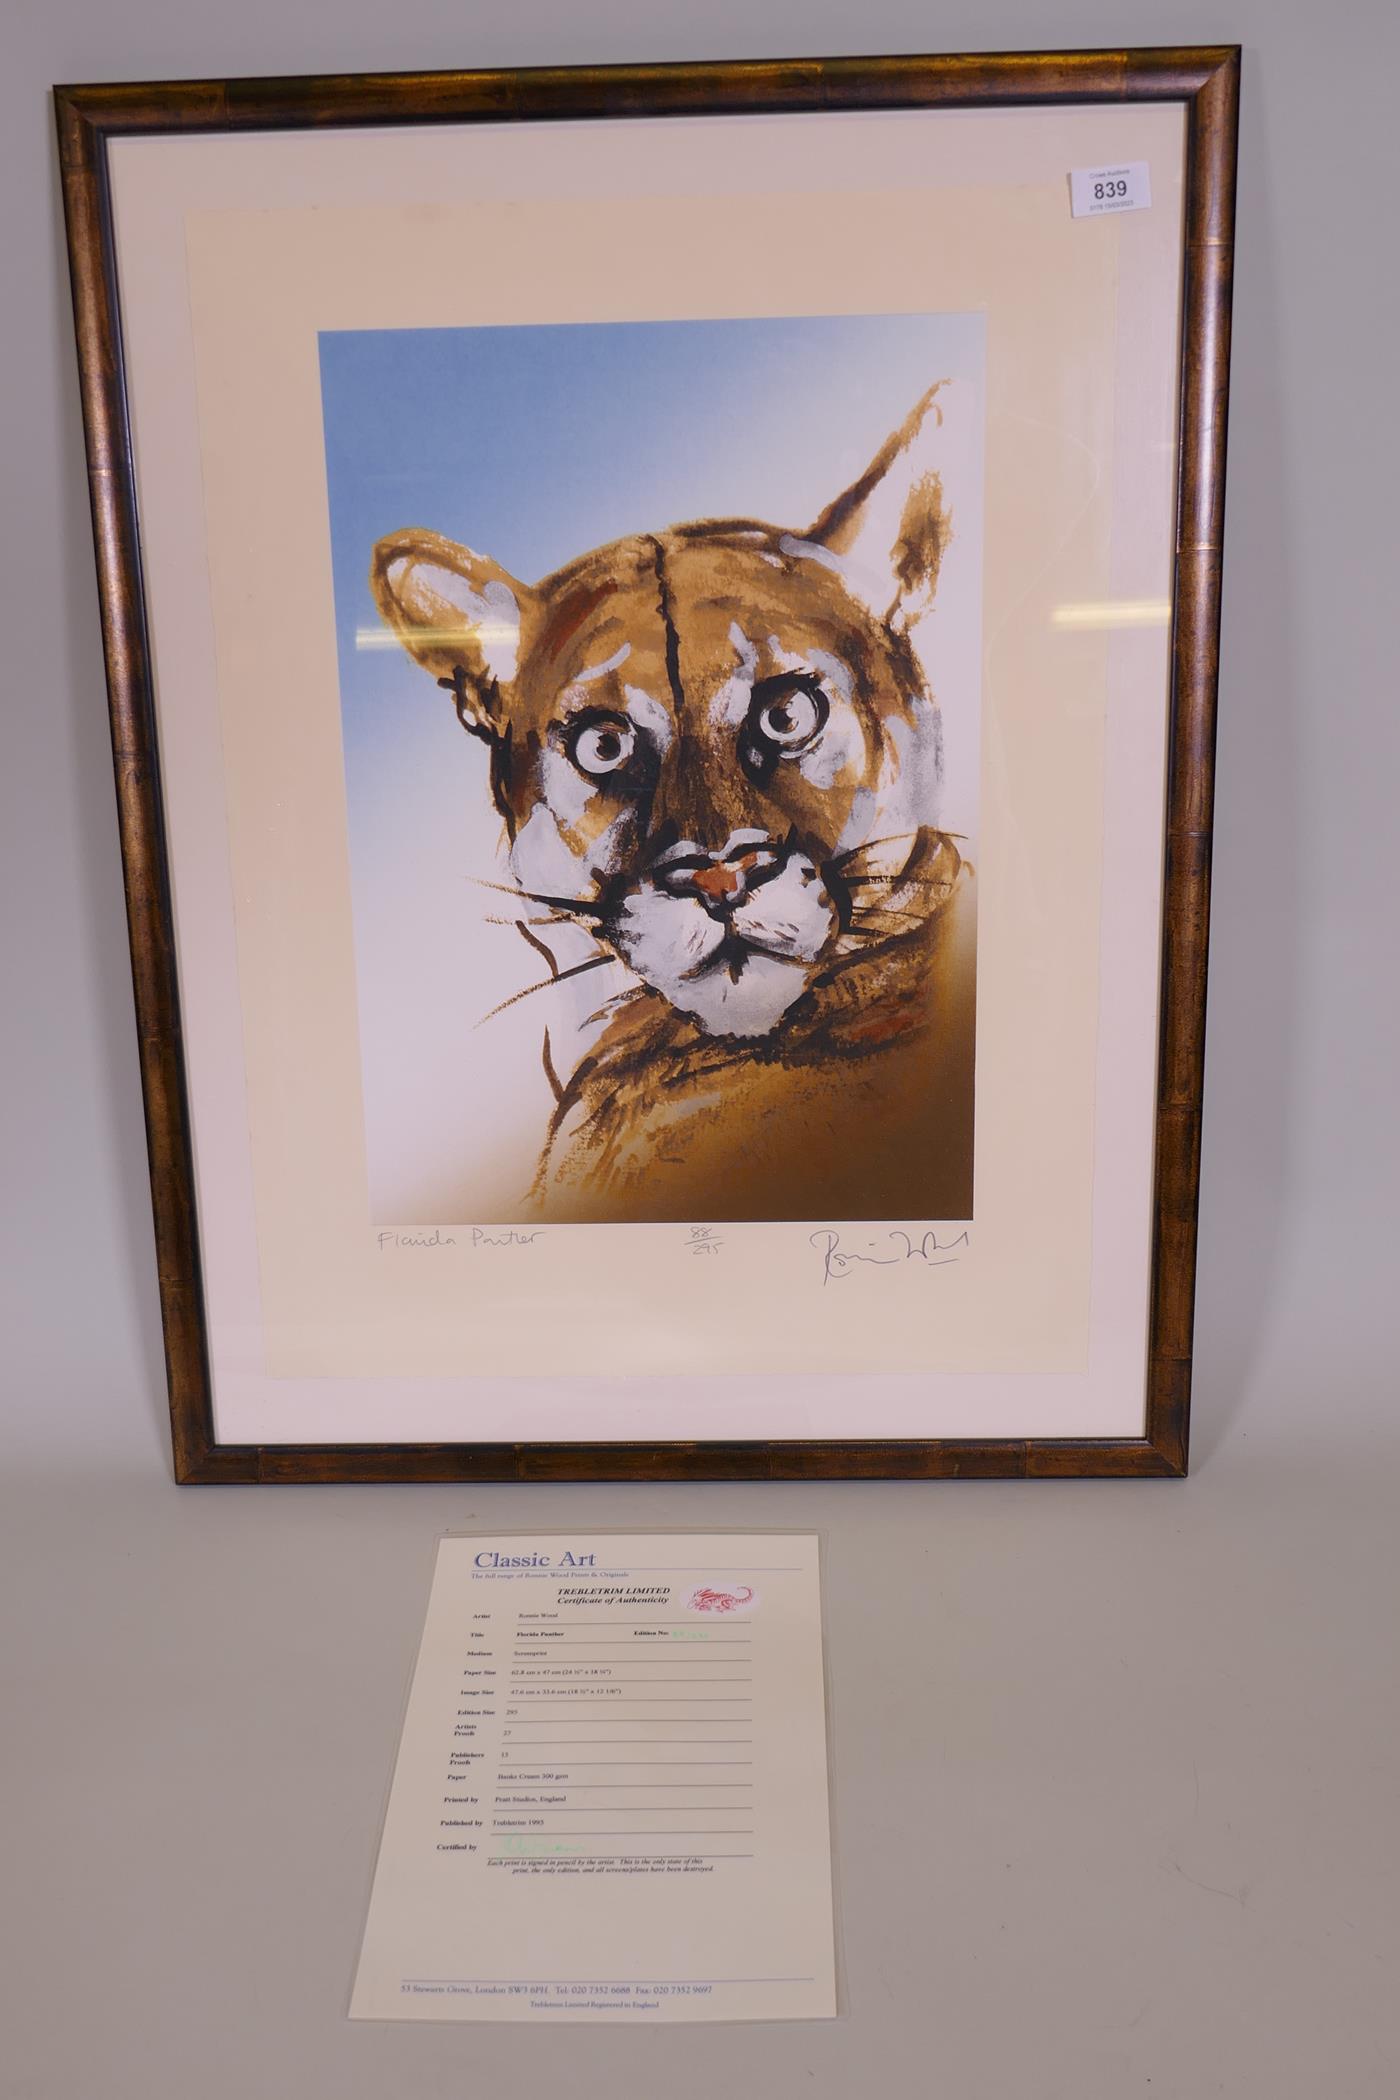 Ronnie Wood - Rolling Stones signed limited edition screen print, 88/295, Florida Panther, published - Image 3 of 4